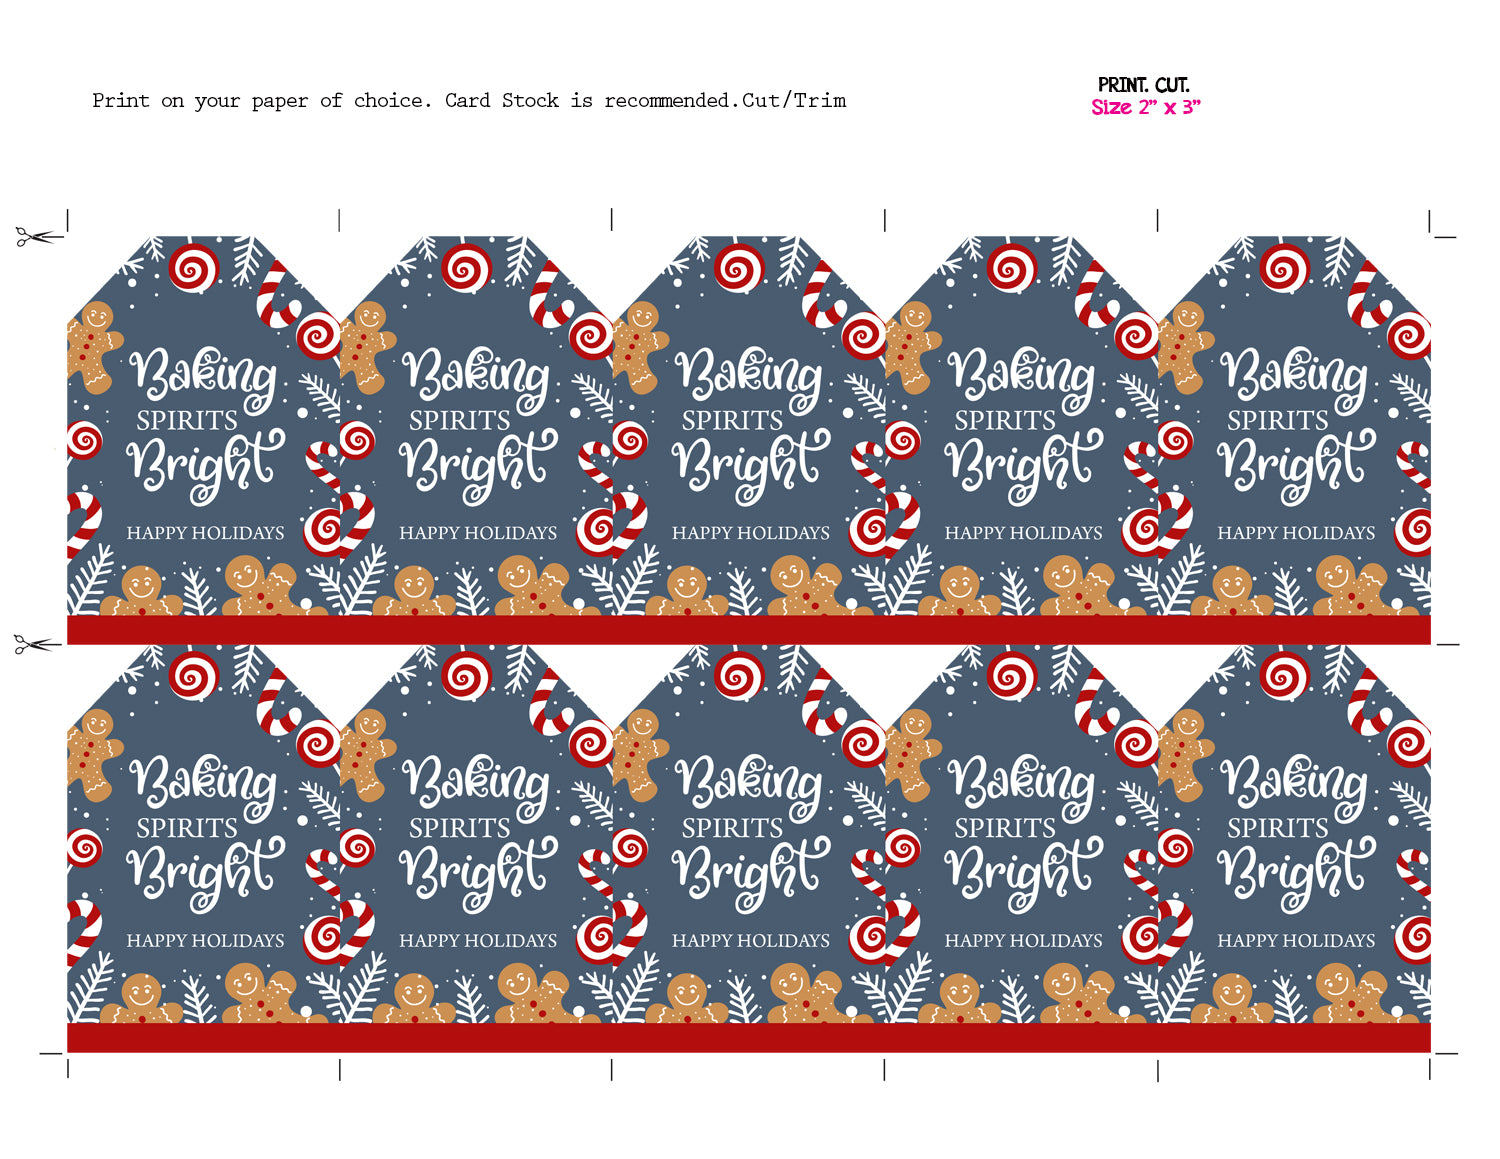 Baking Spirits Bright Printable Christmas Cookie Tags (Instant Download)